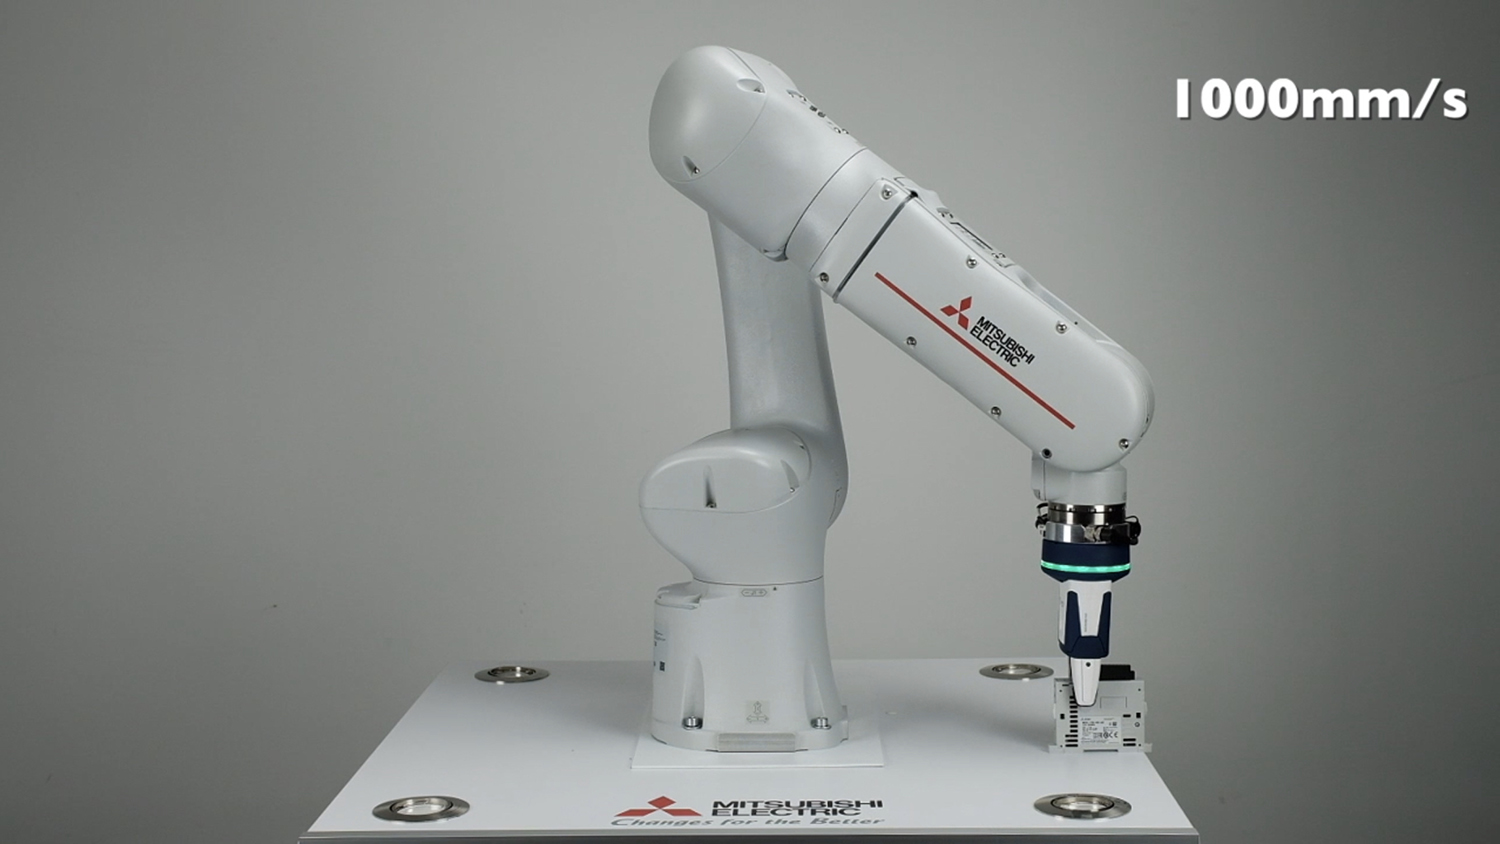 To further maximise the return on investment the MELFA ASSISTA cobot offers a high-speed operation mode for when it is not working alongside humans – meaning it can be used as a standard industrial robot as well. [Source: Mitsubishi Electric Europe B.V.]